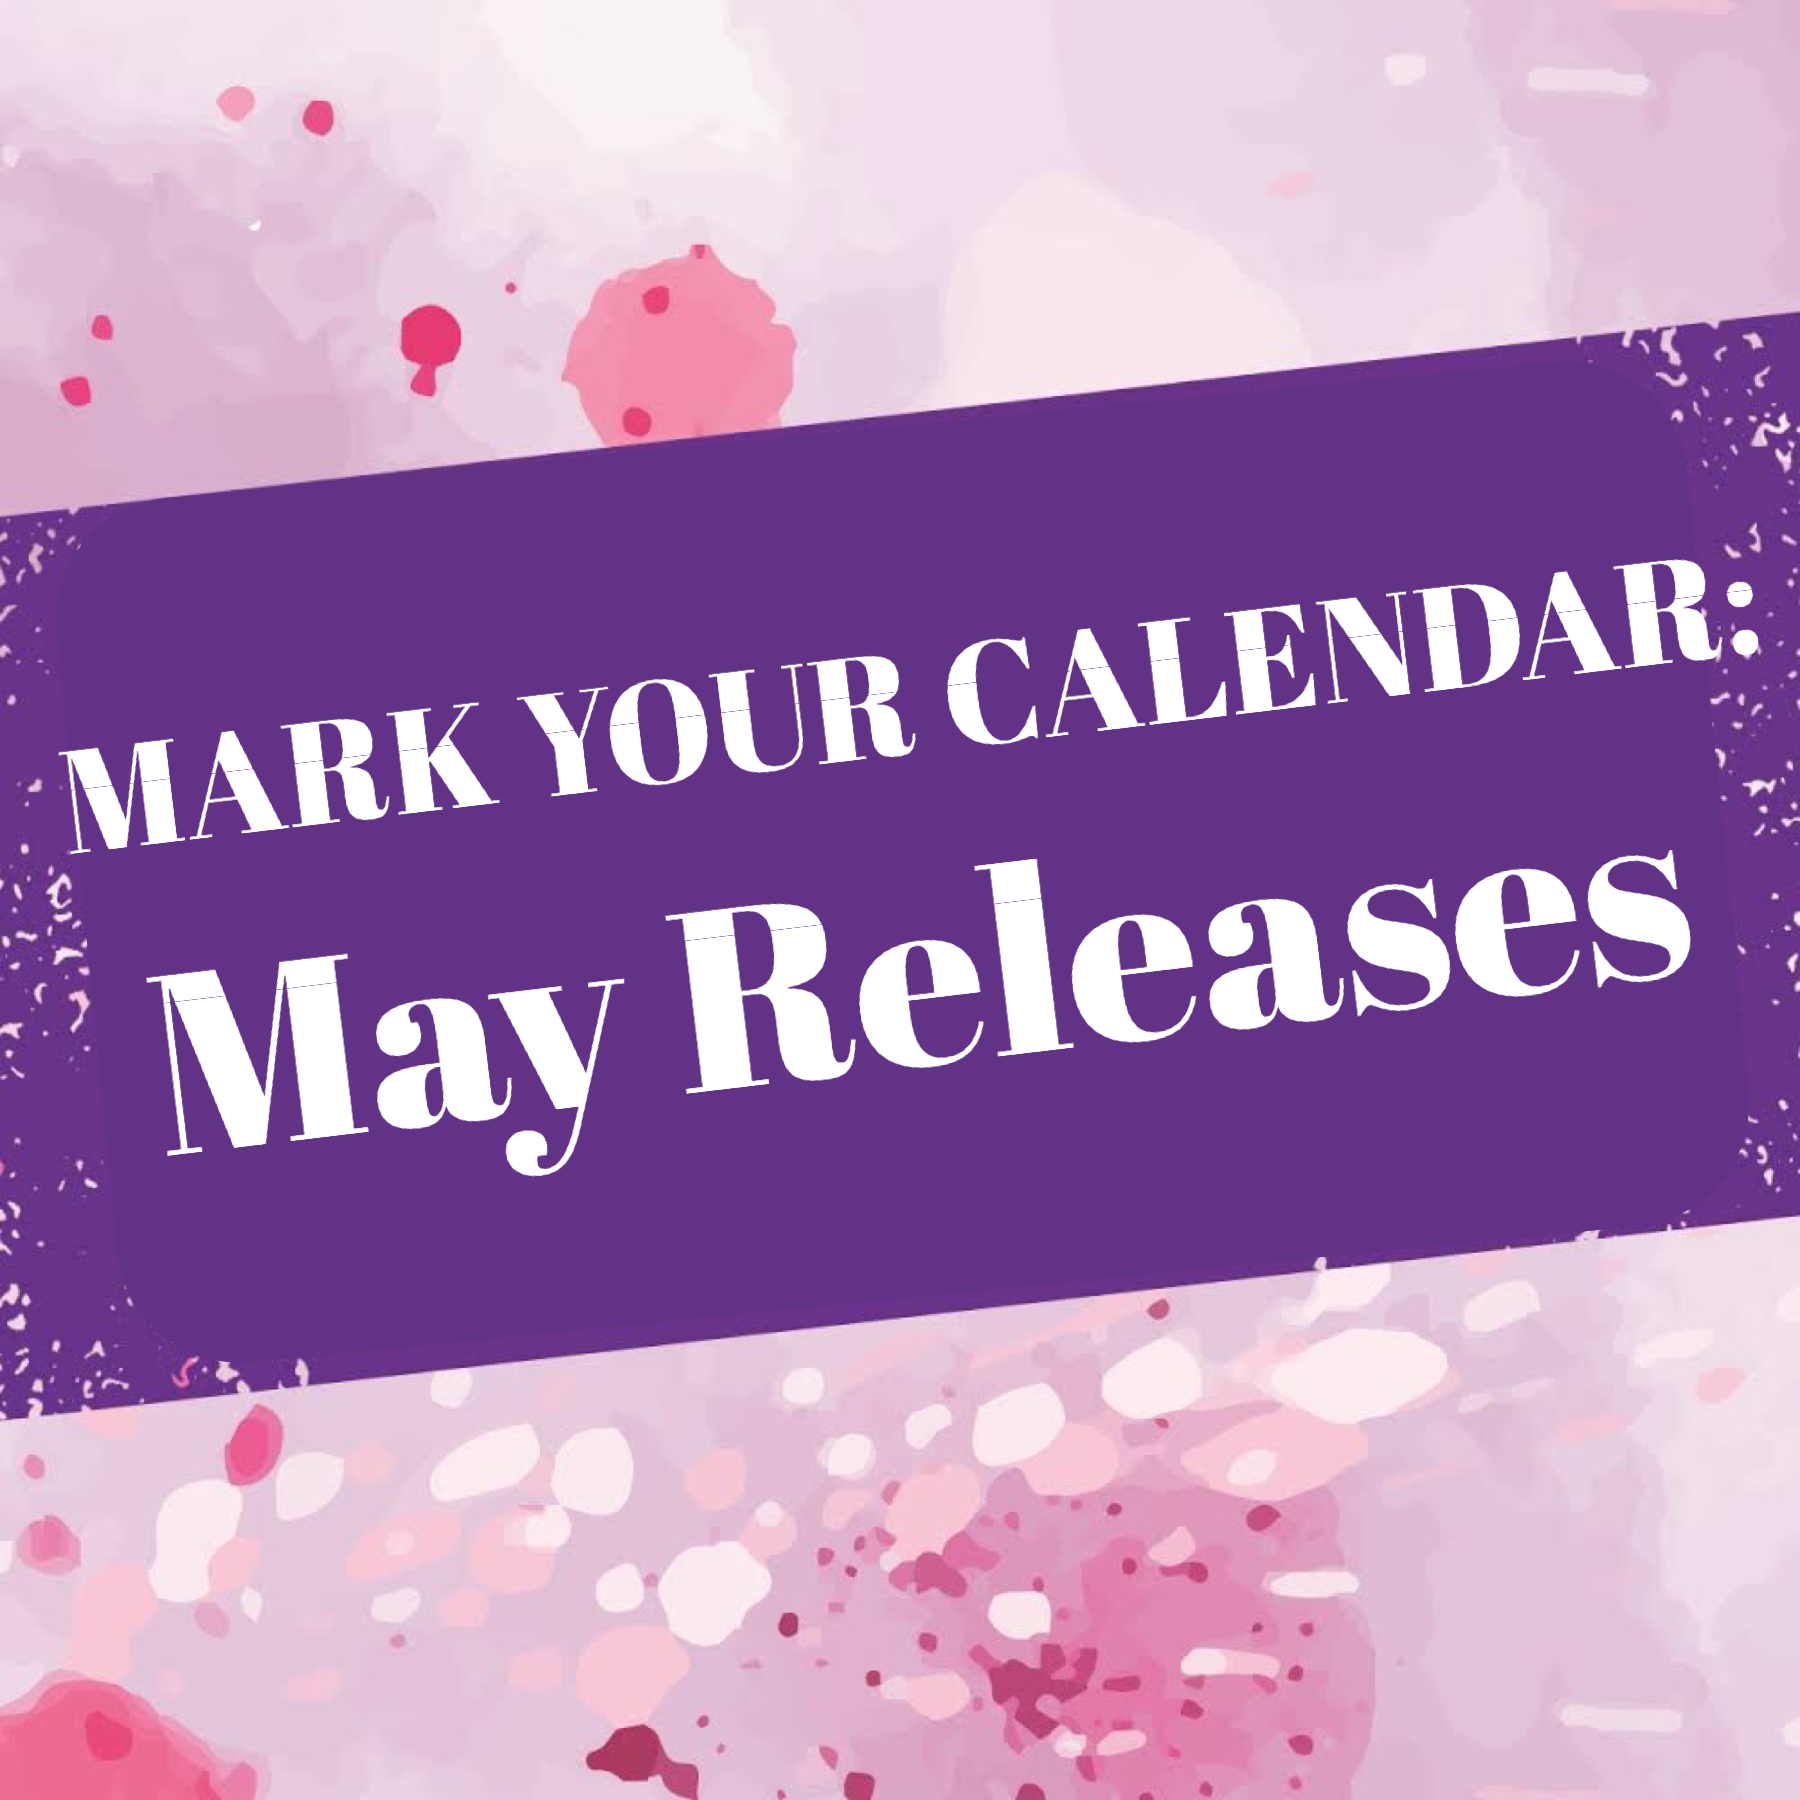 MARK YOUR CALENDAR May Releases